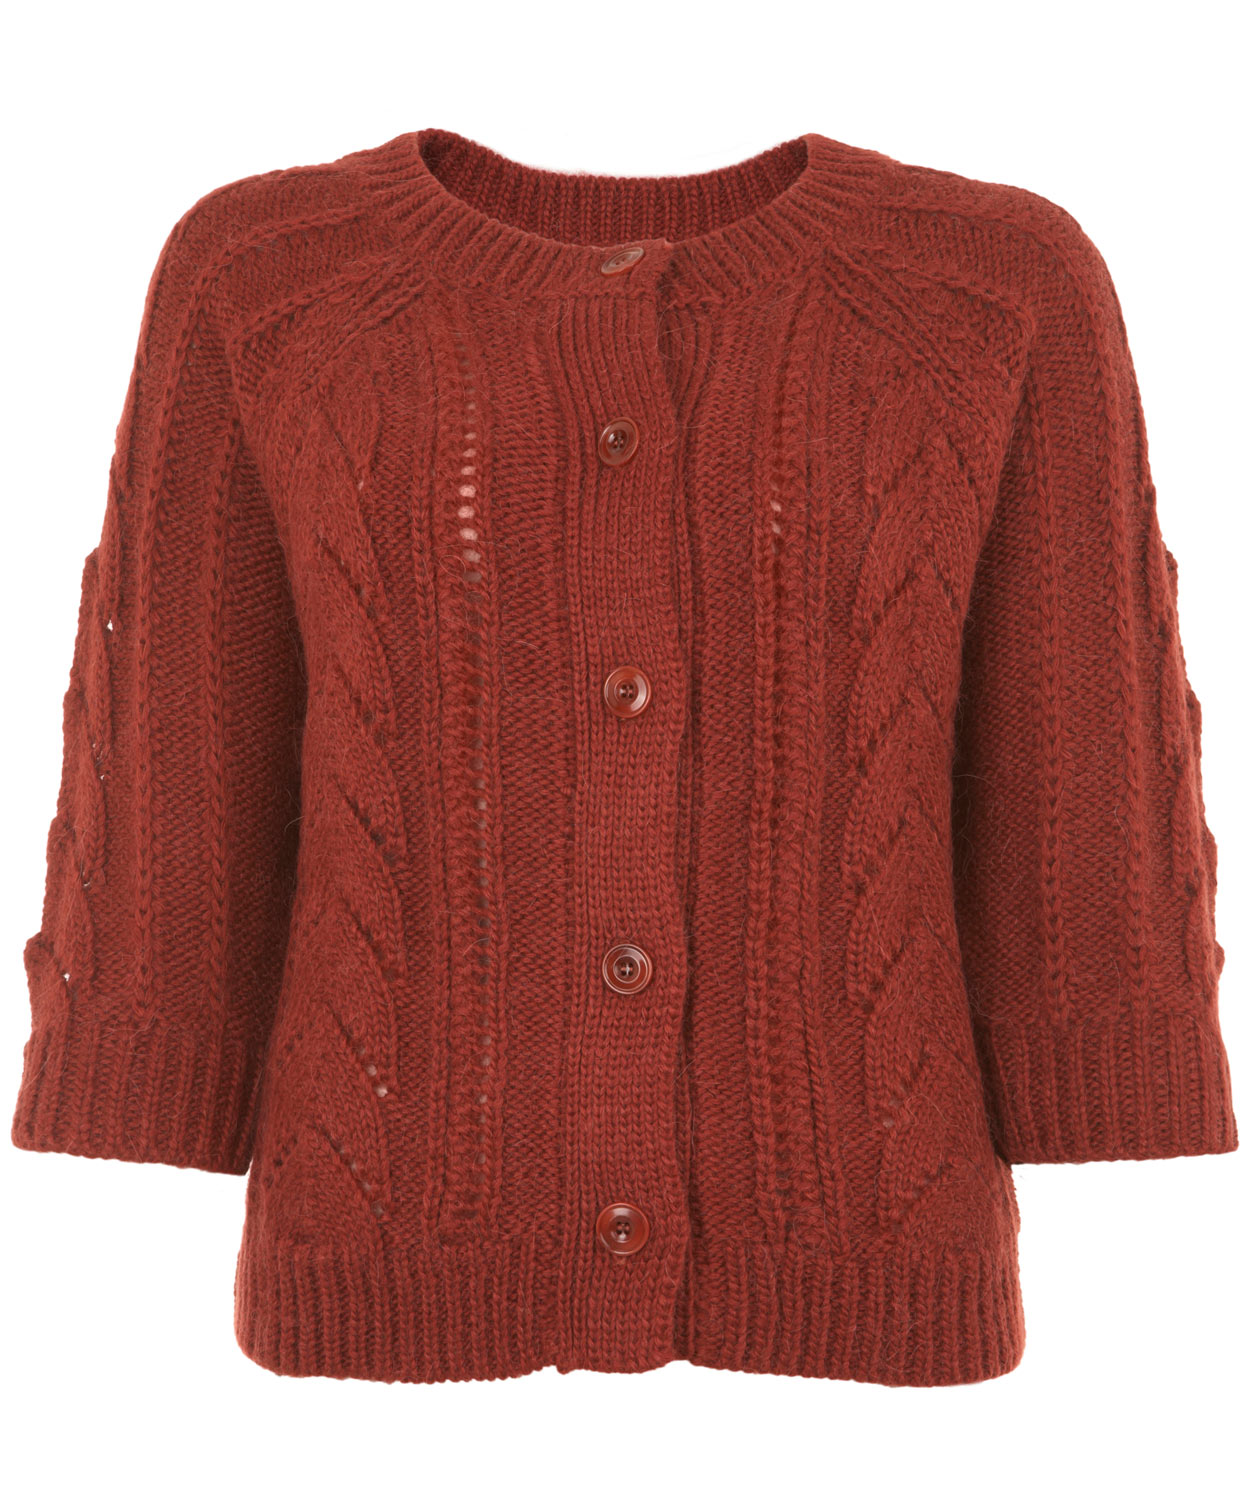 Sessun Burgundy Cable Knit Cropped Cardigan in Red - Lyst